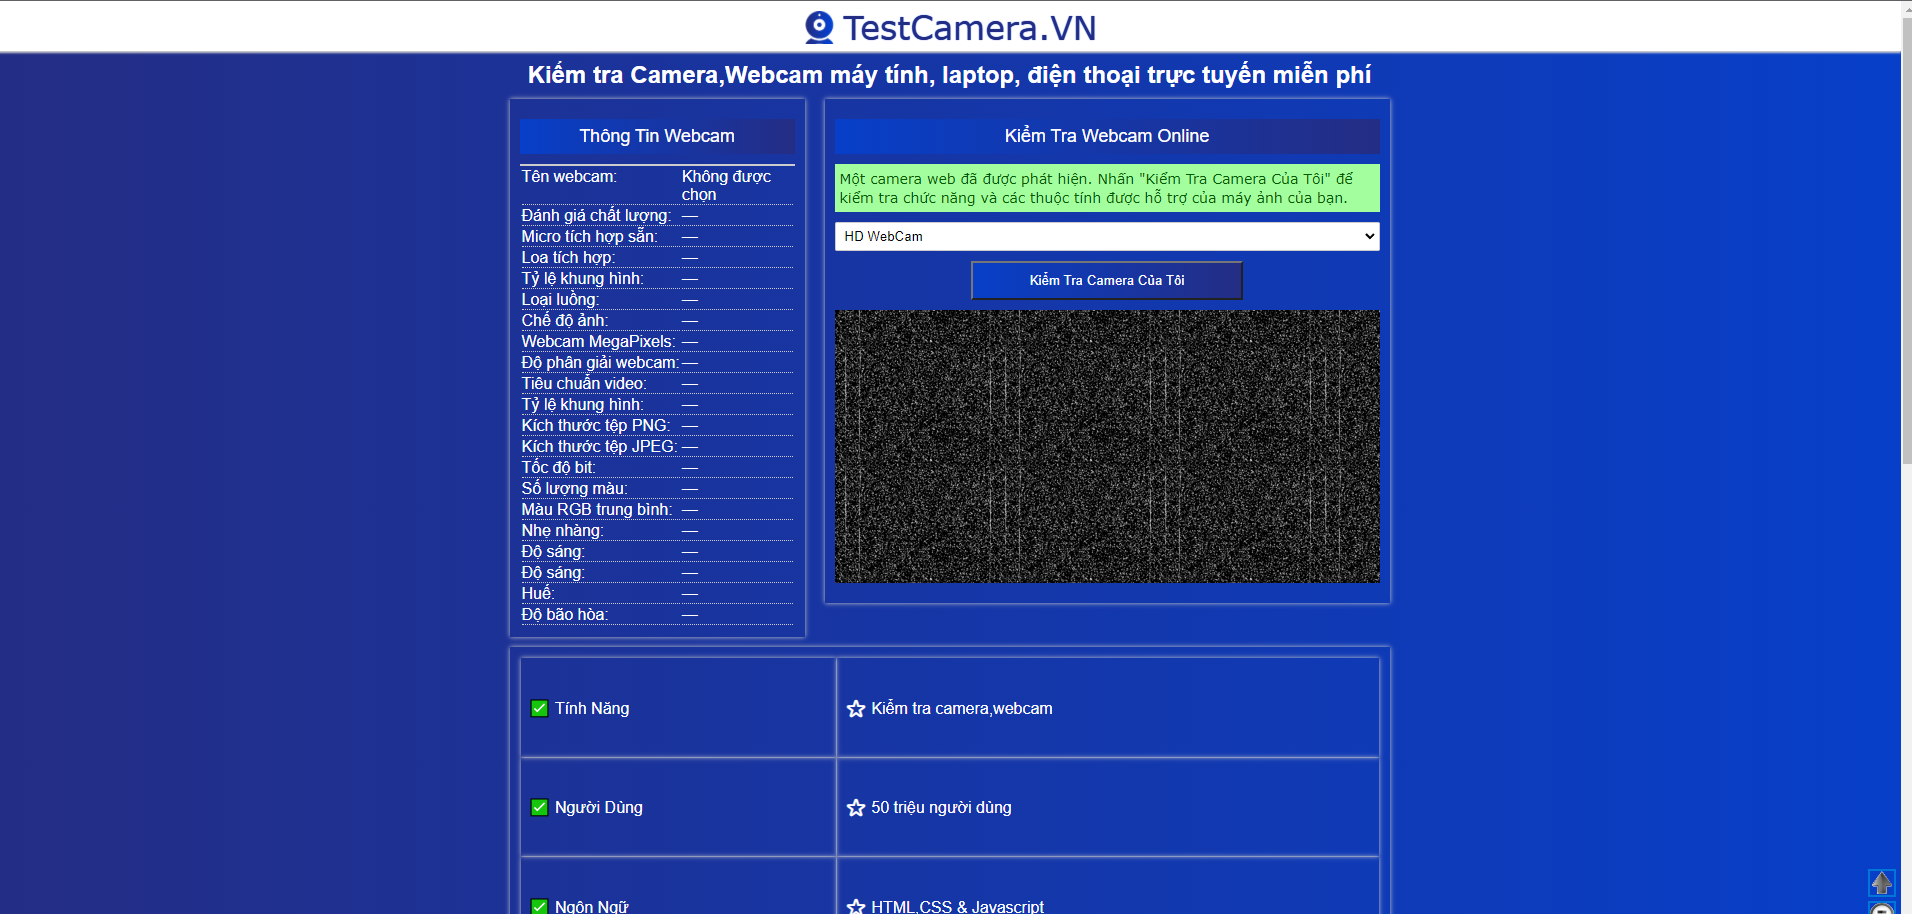 File:Testcamera-vn.png - Wikimedia Commons